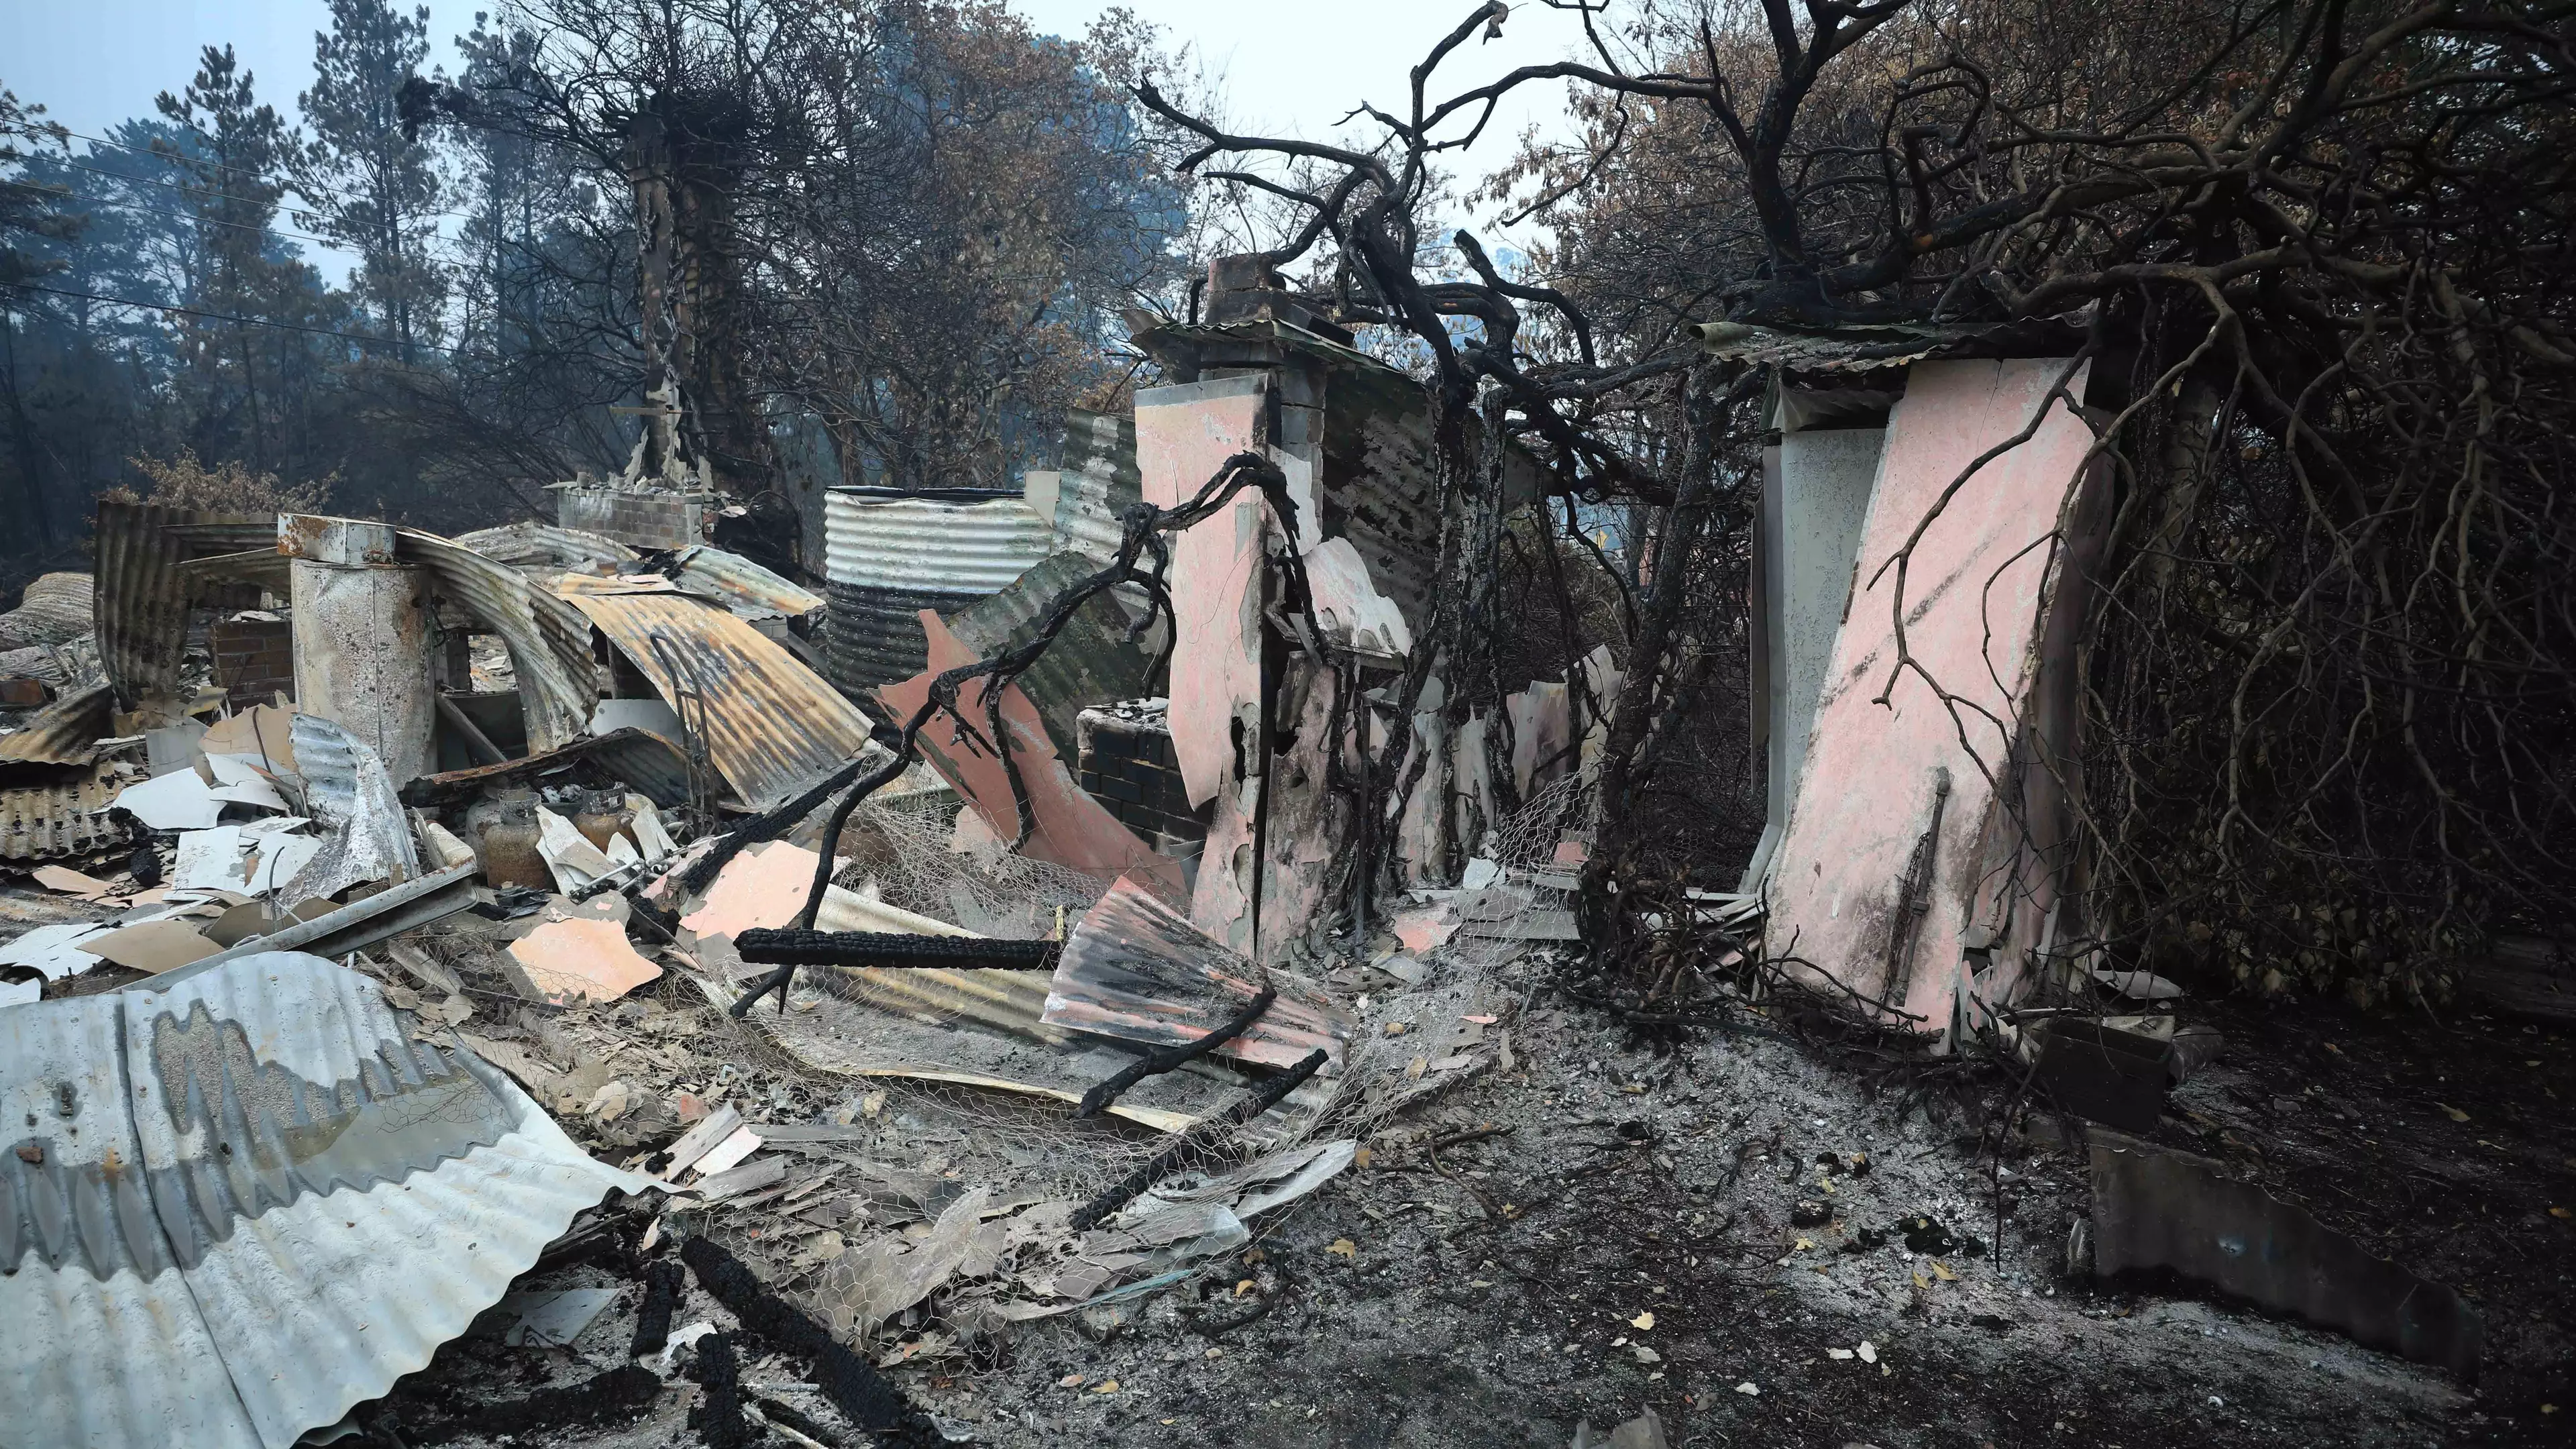 Westpac To Waive Year's Worth Of Mortgage Payments For People Affected By Bushfires